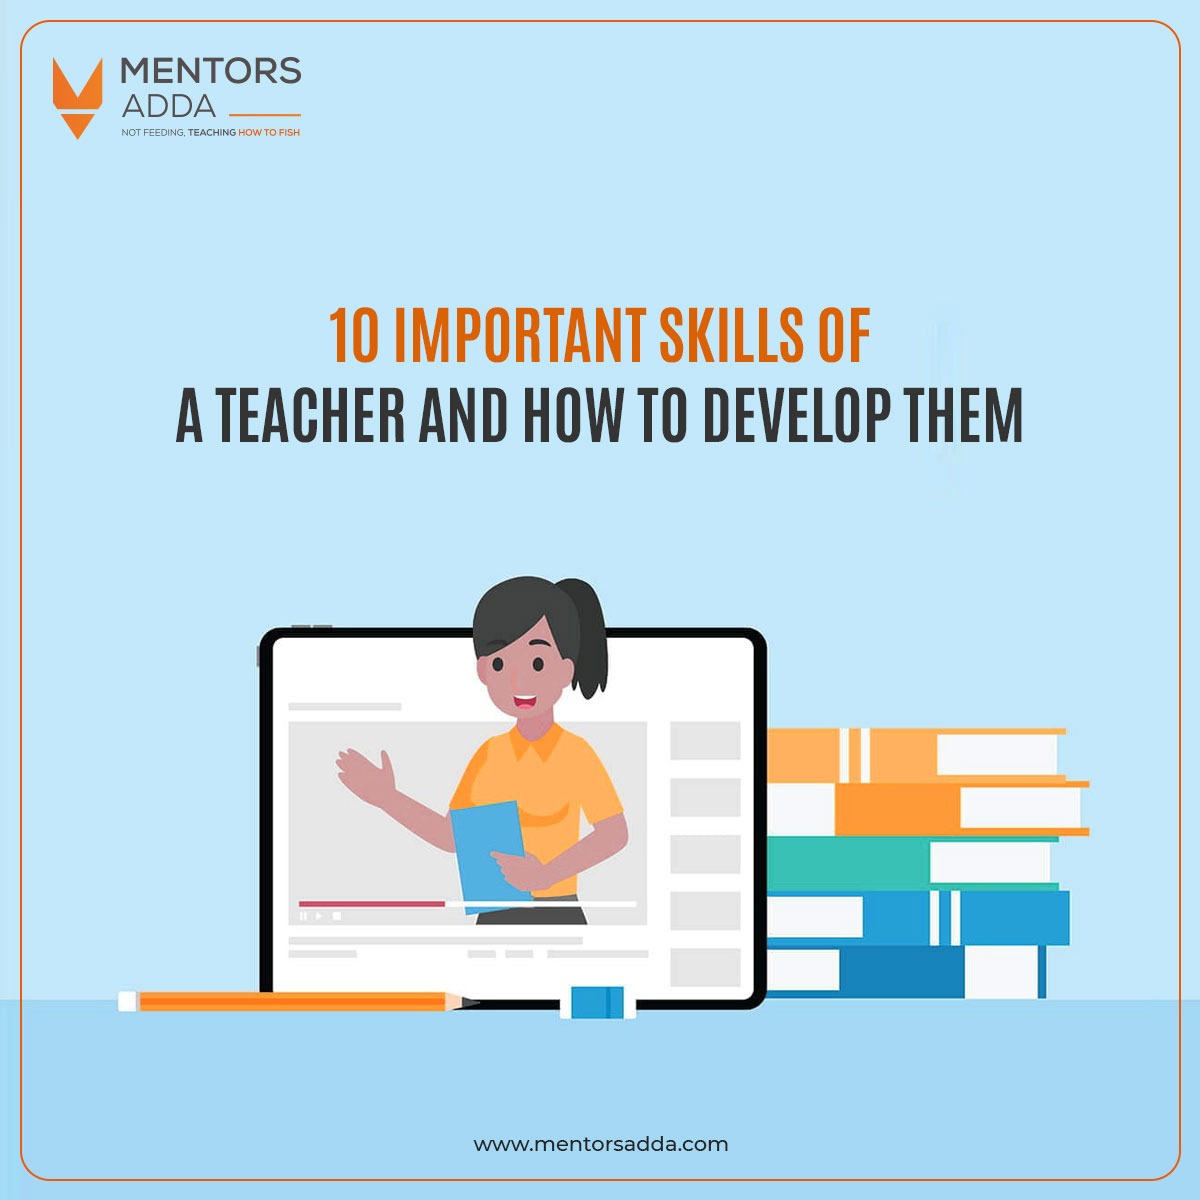 10 Important Skills of a Teacher and How to Develop Them